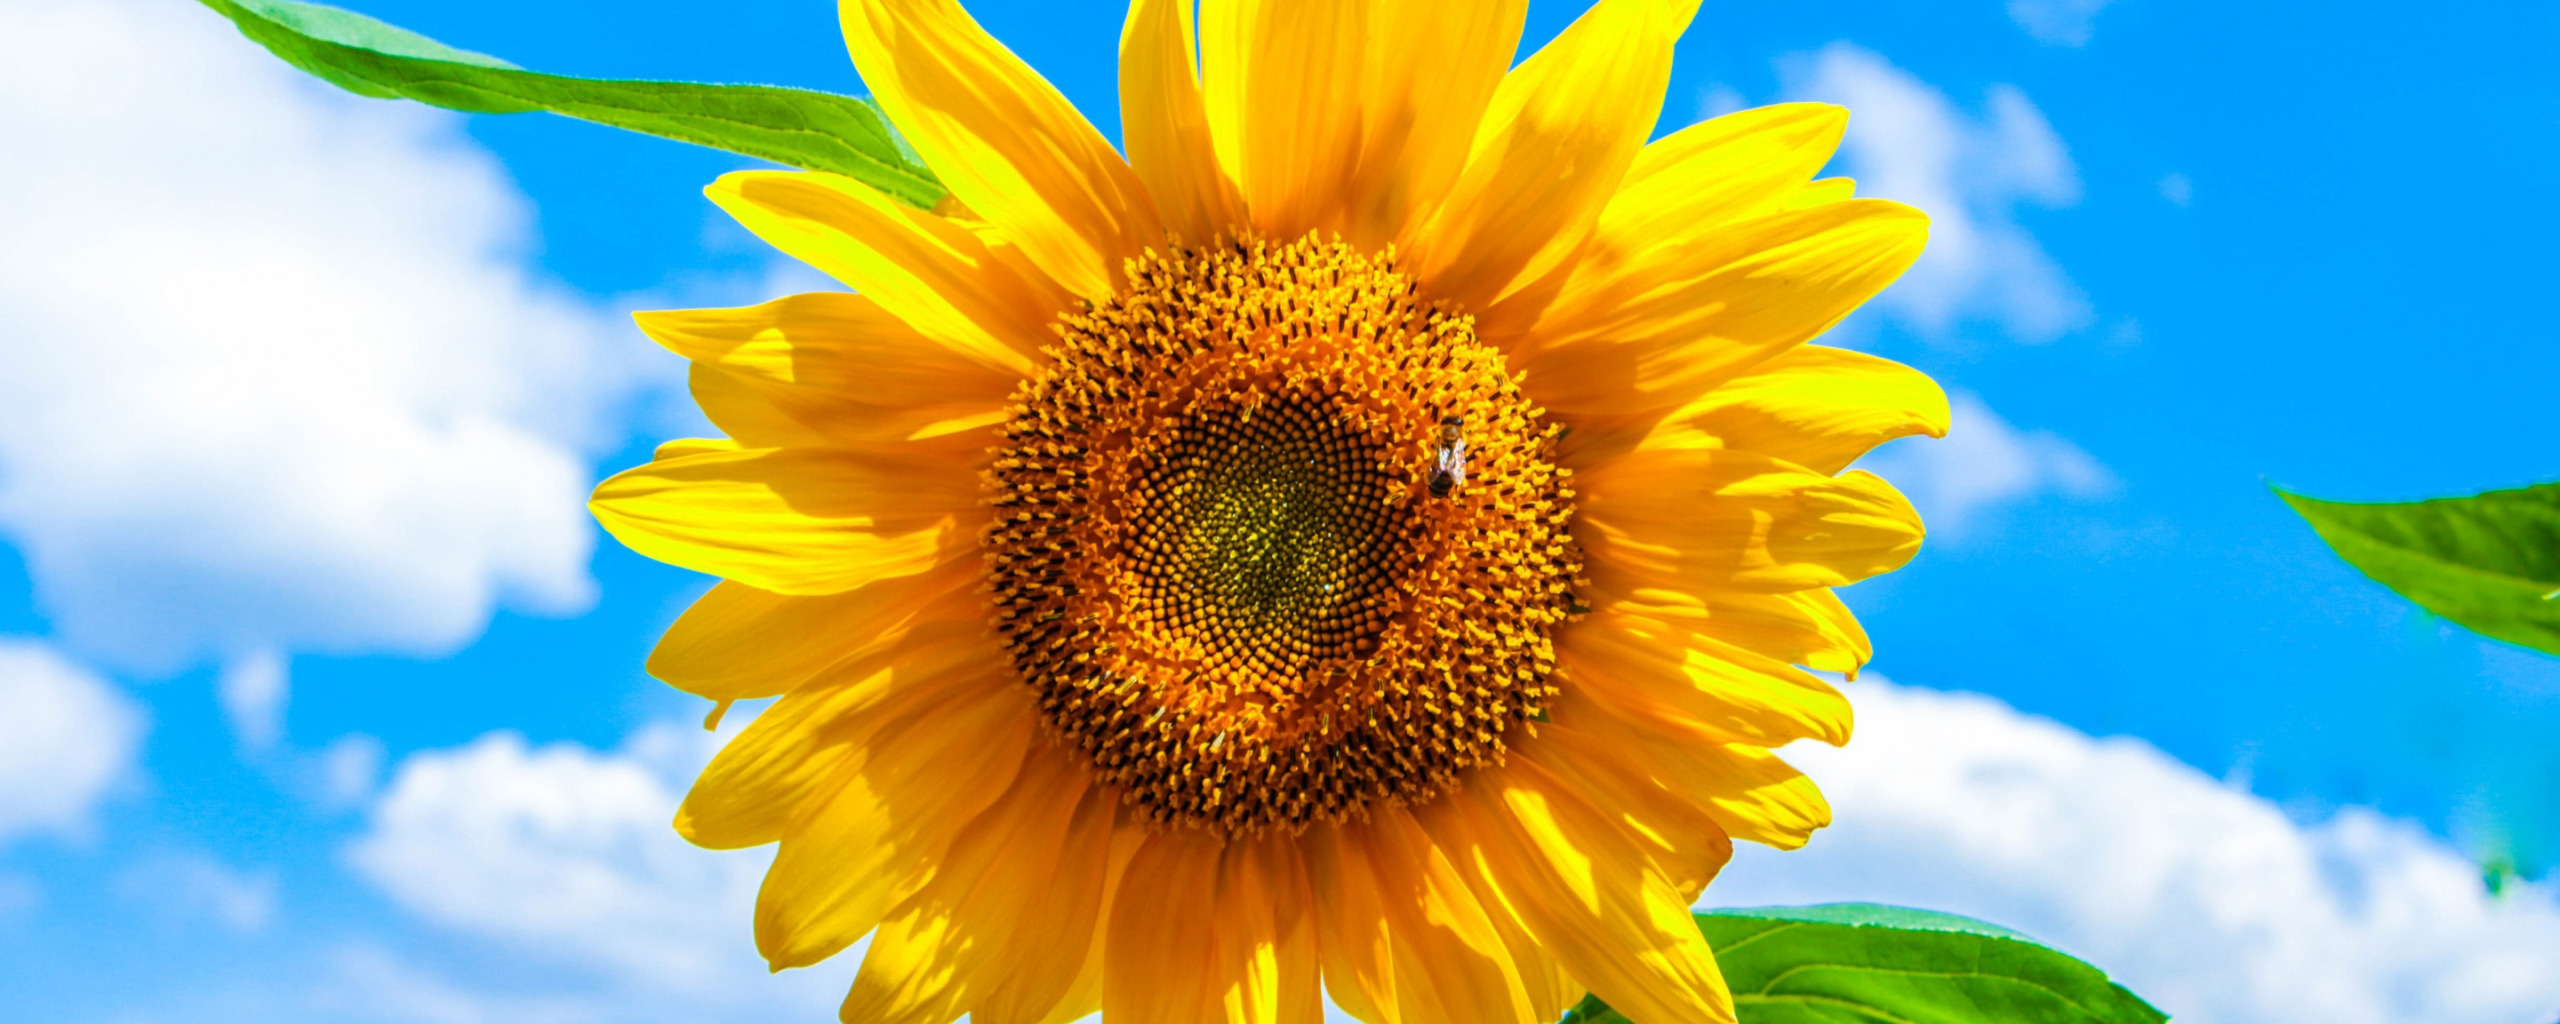 Download wallpaper the sky, clouds, sunflower, petals, secti